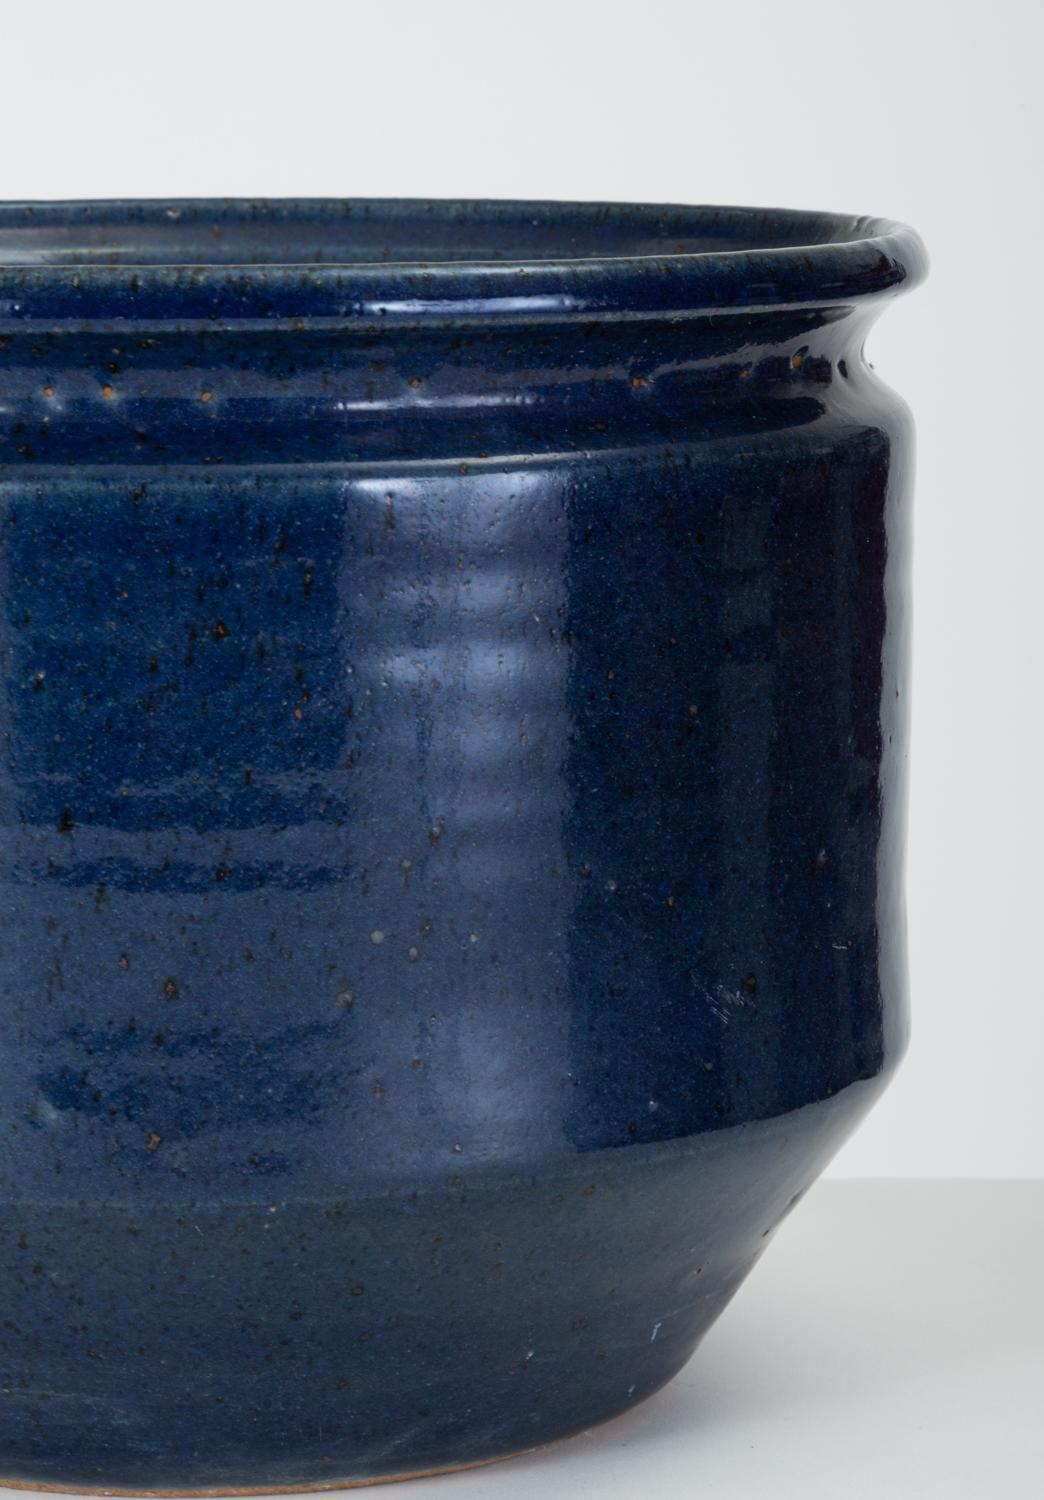 Late 20th Century Pair of Blue-Glazed Earthgender Bowl Planters, David Cressey and Robert Maxwell